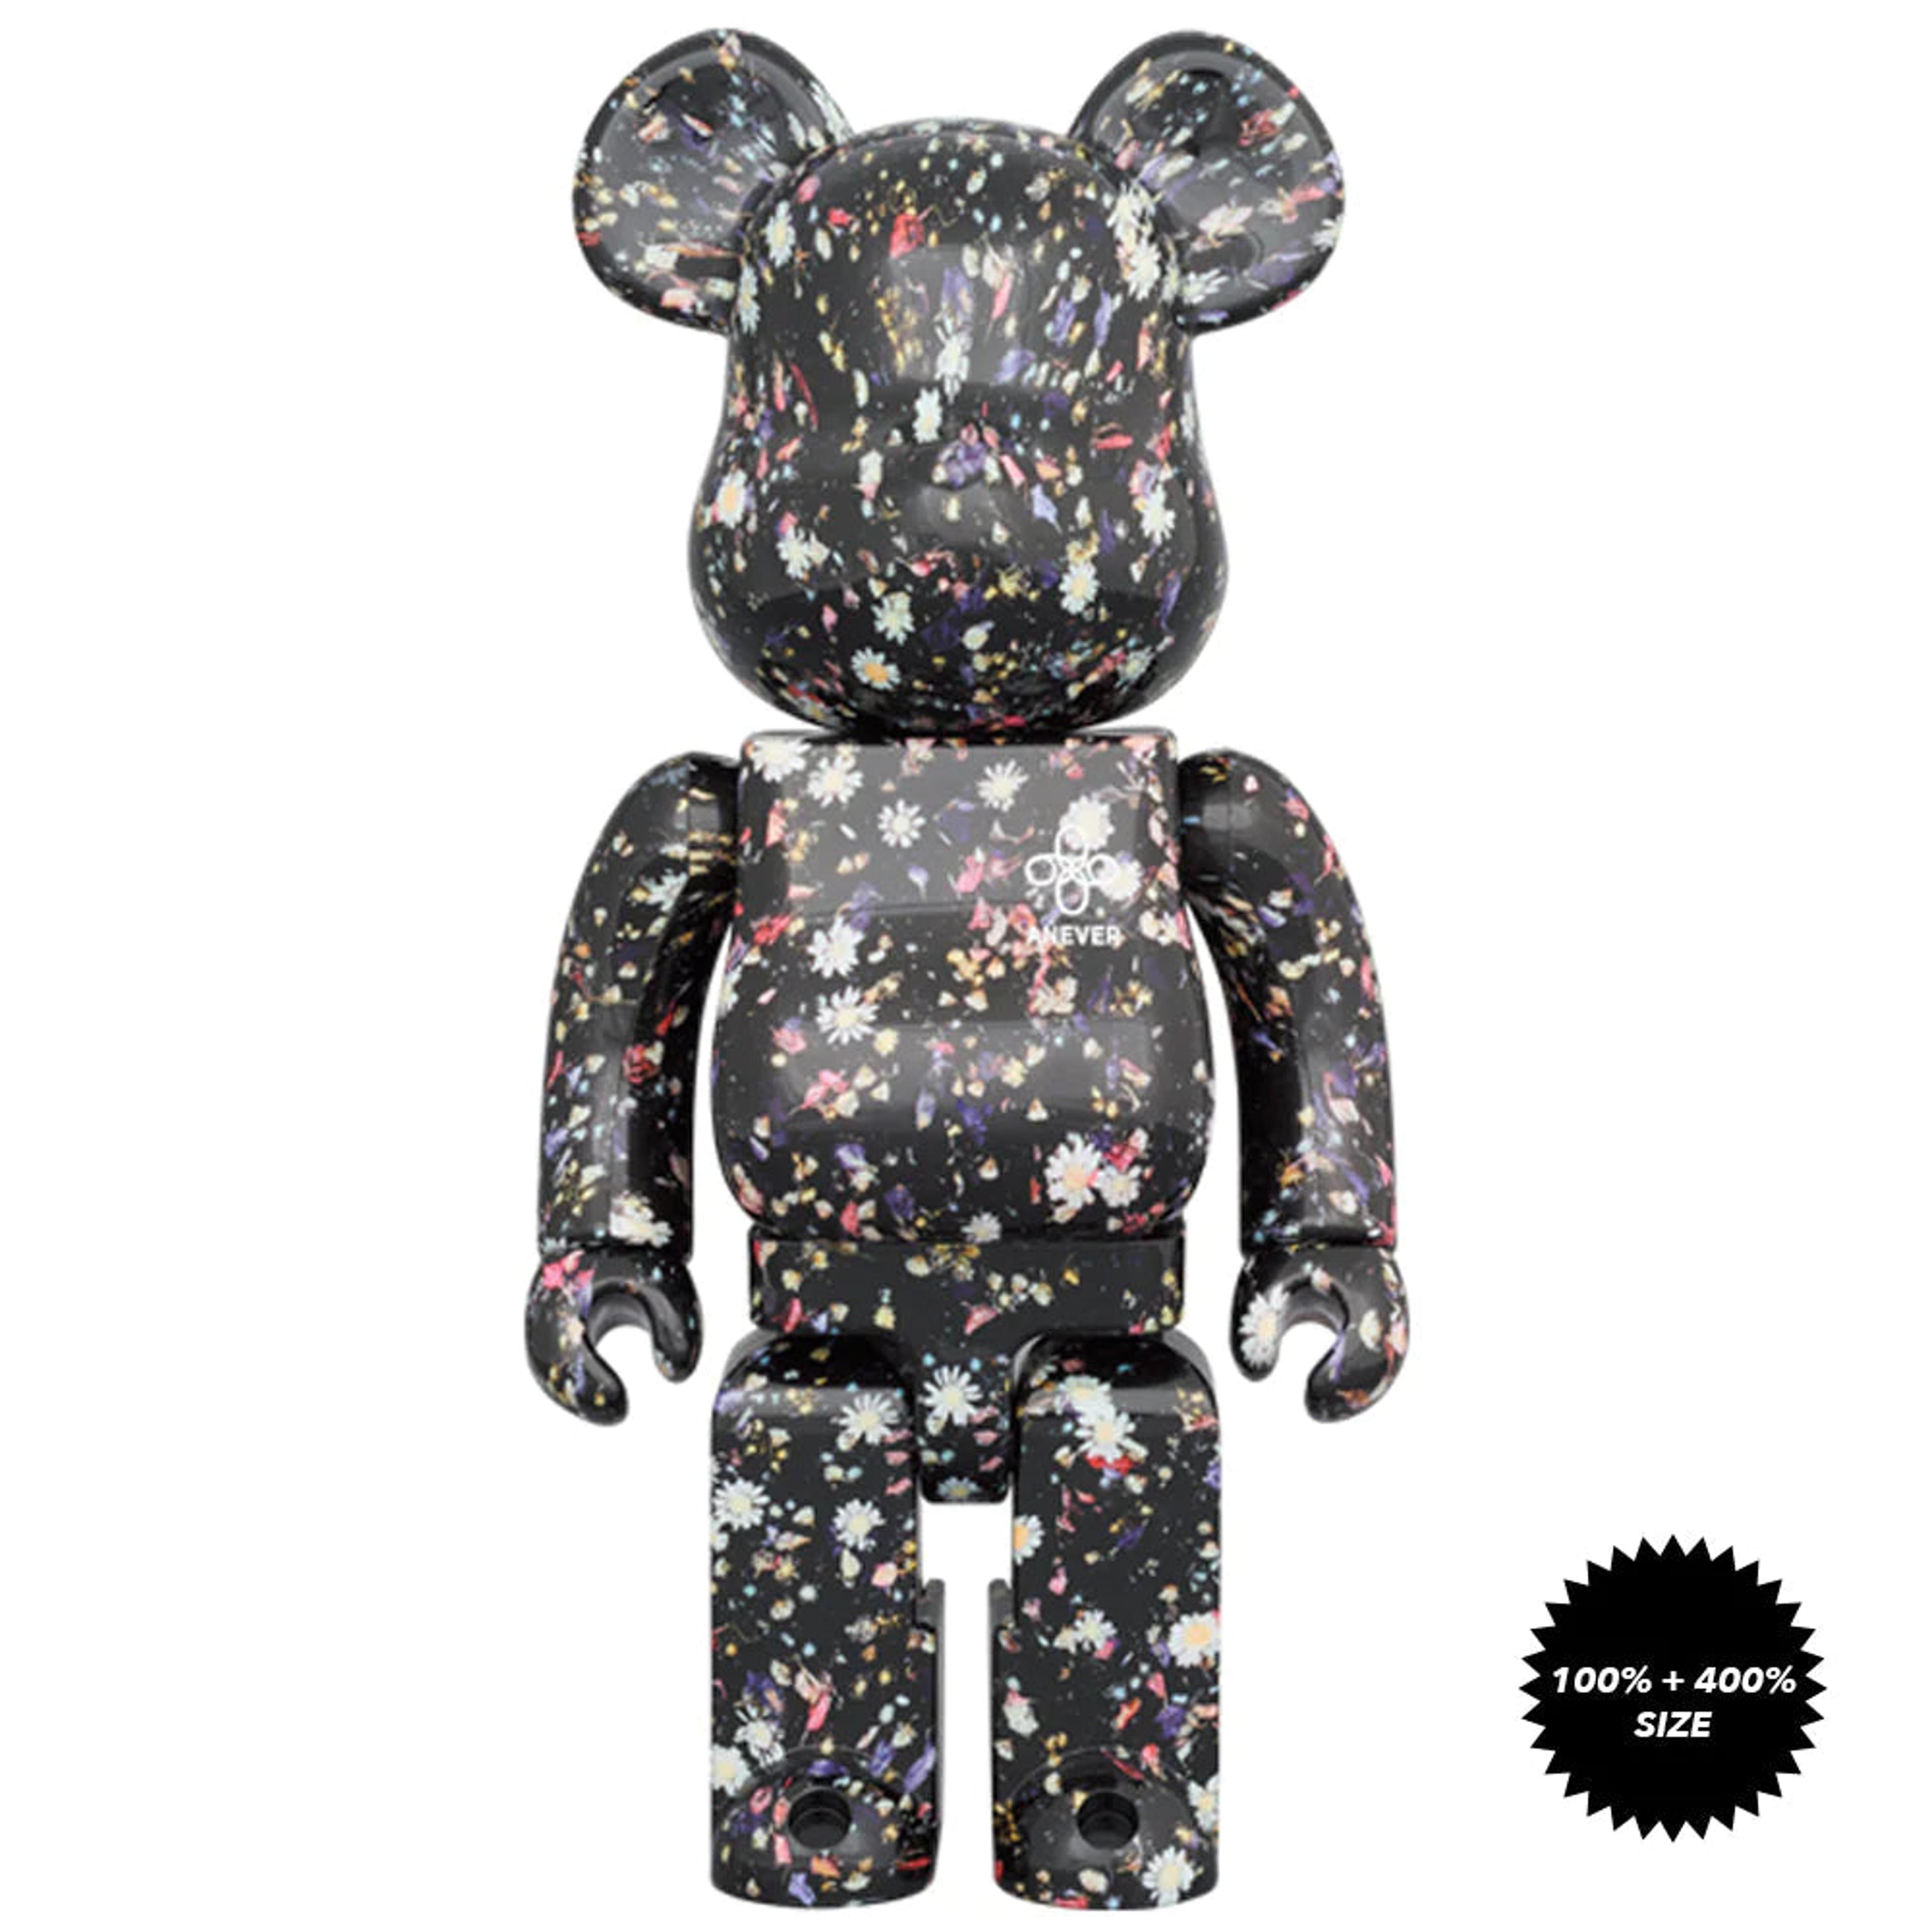 Alternate View 2 of BE@RBRICK ANEVER BLACK 400% + 100%